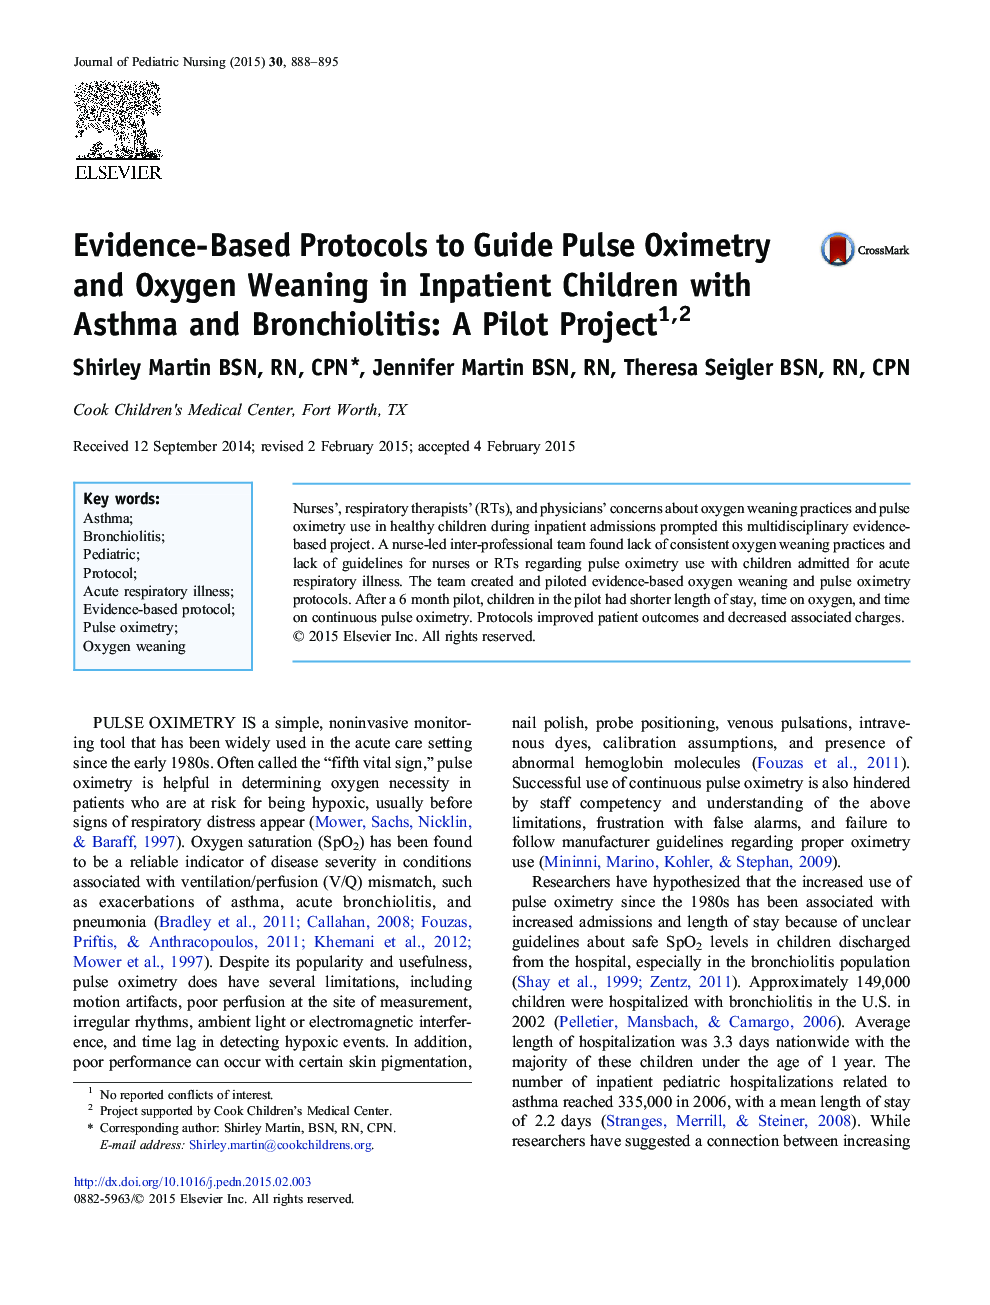 Evidence-Based Protocols to Guide Pulse Oximetry and Oxygen Weaning in Inpatient Children with Asthma and Bronchiolitis: A Pilot Project 12